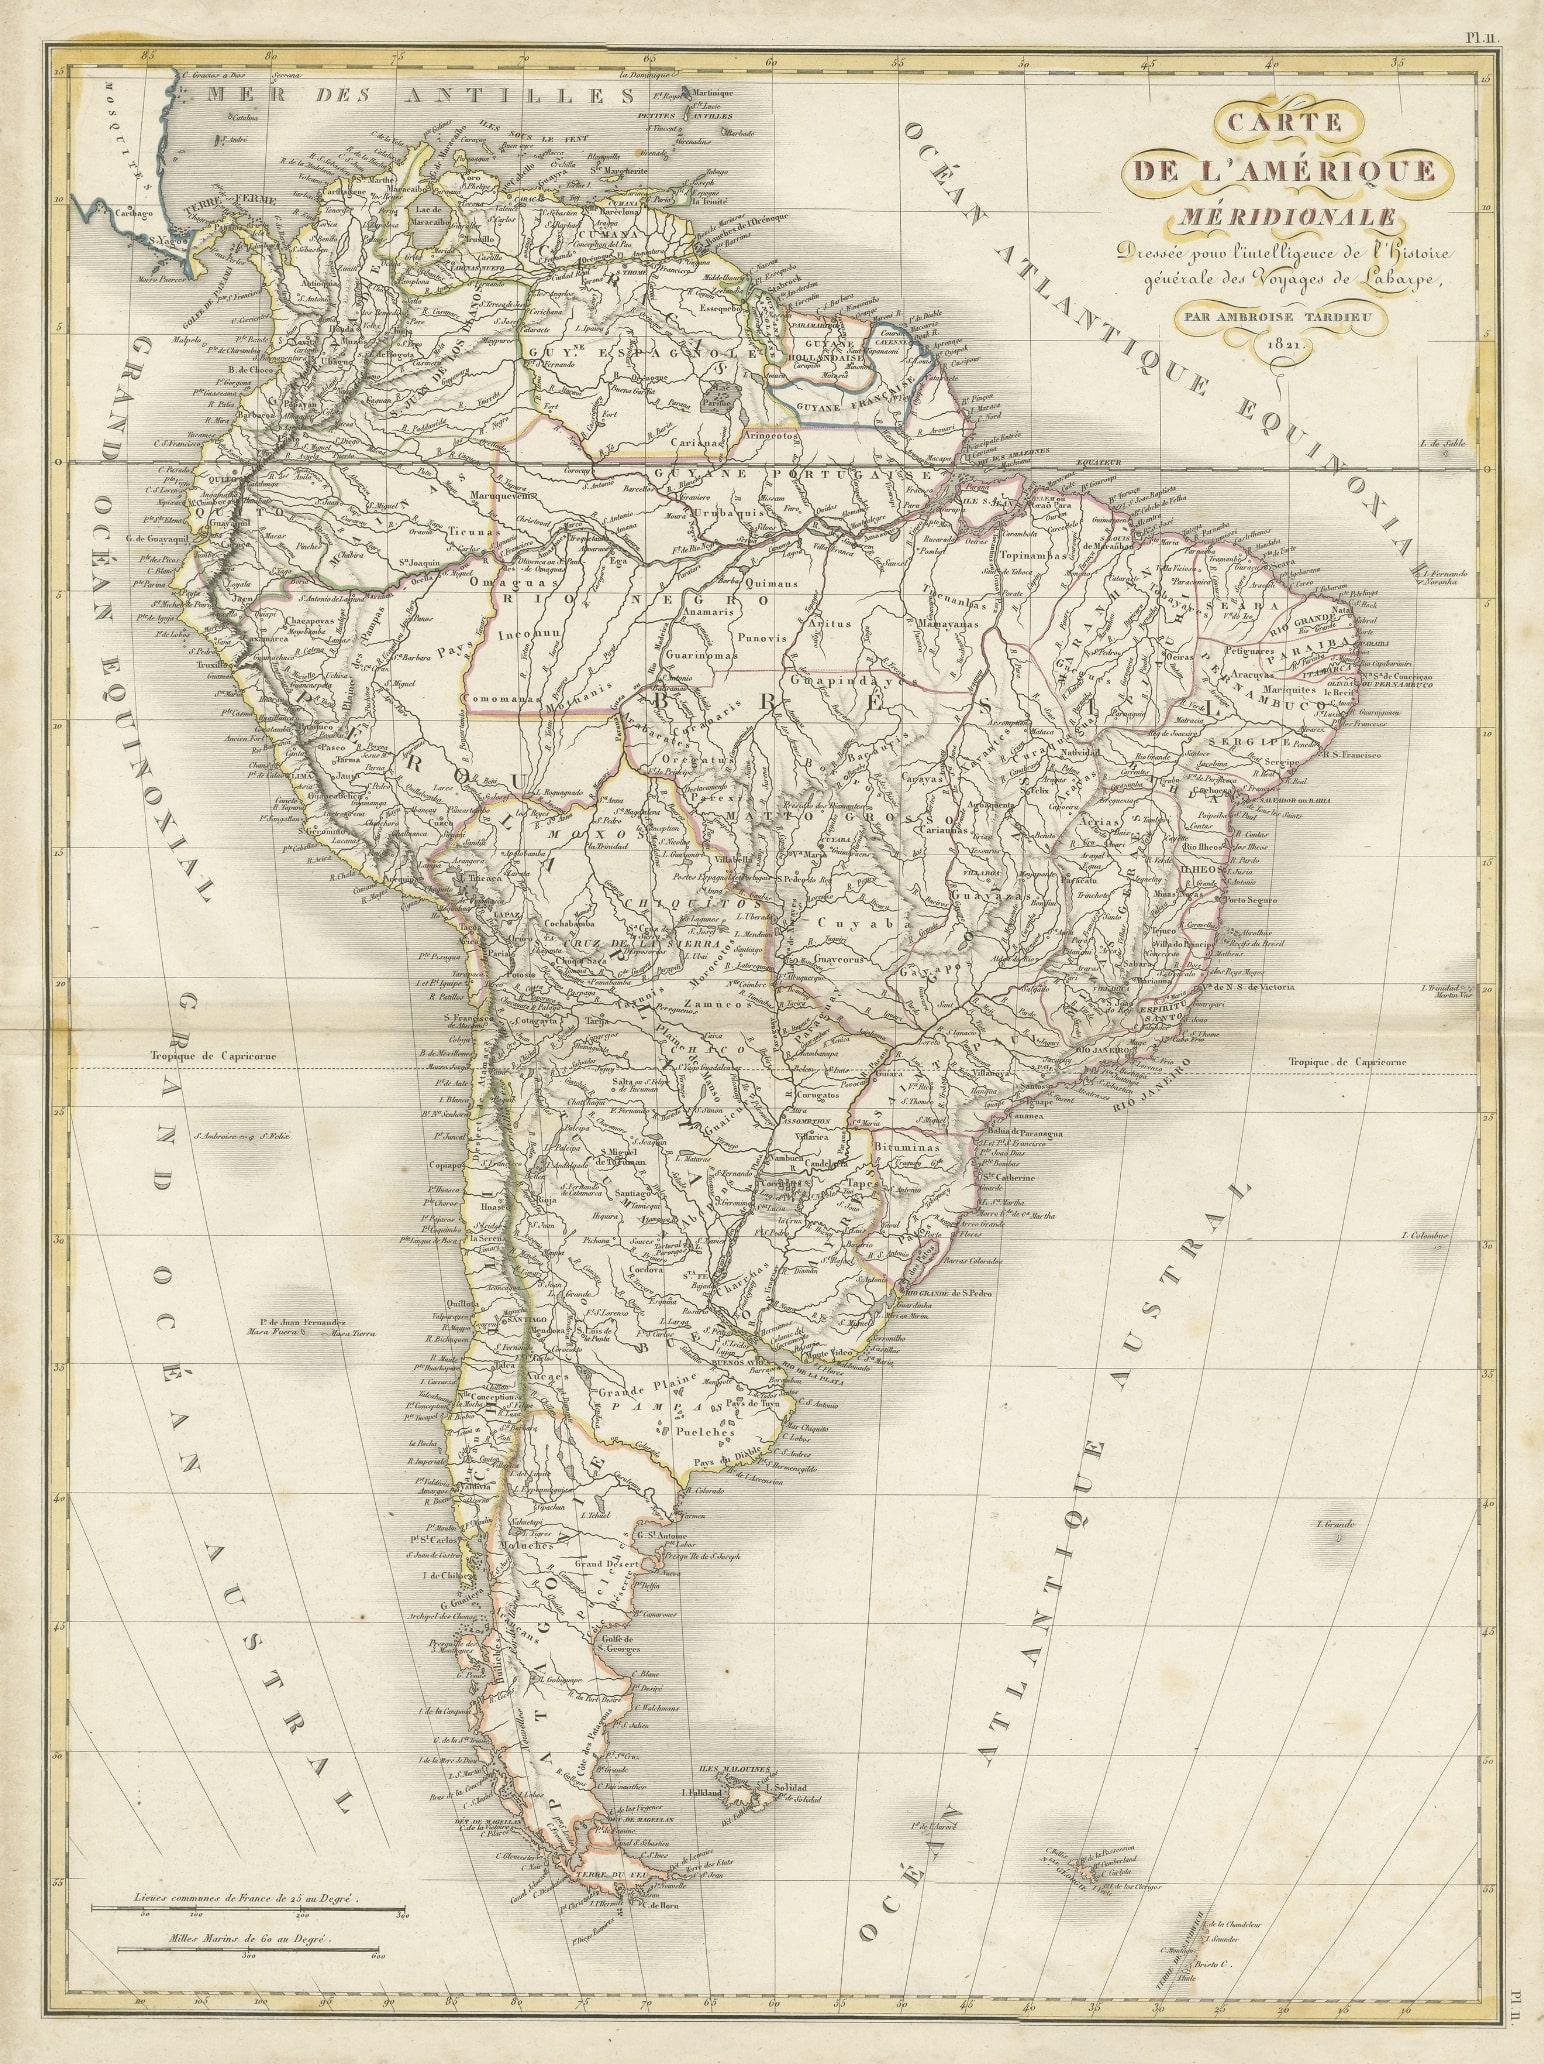 Antique map titled 'Carte de l'Amérique Méridionale'. Scarce map of South America, published in Paris in 1821. The map shows the continent in the midst its of several decades of revolution, which reshaped the geopolitical landscape and boundaries